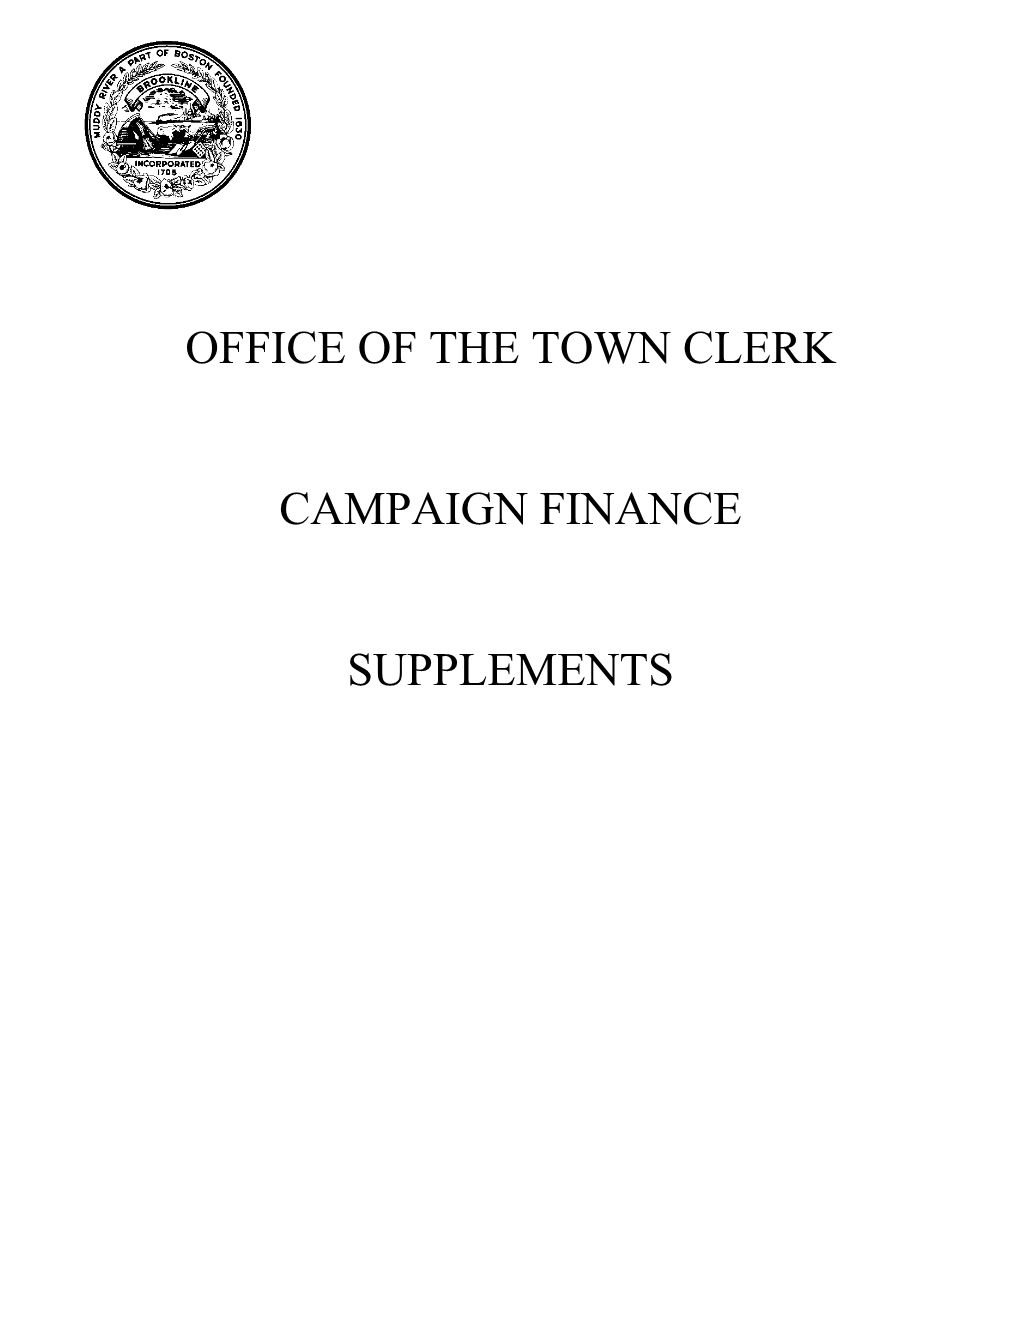 Campaign Finance Packet